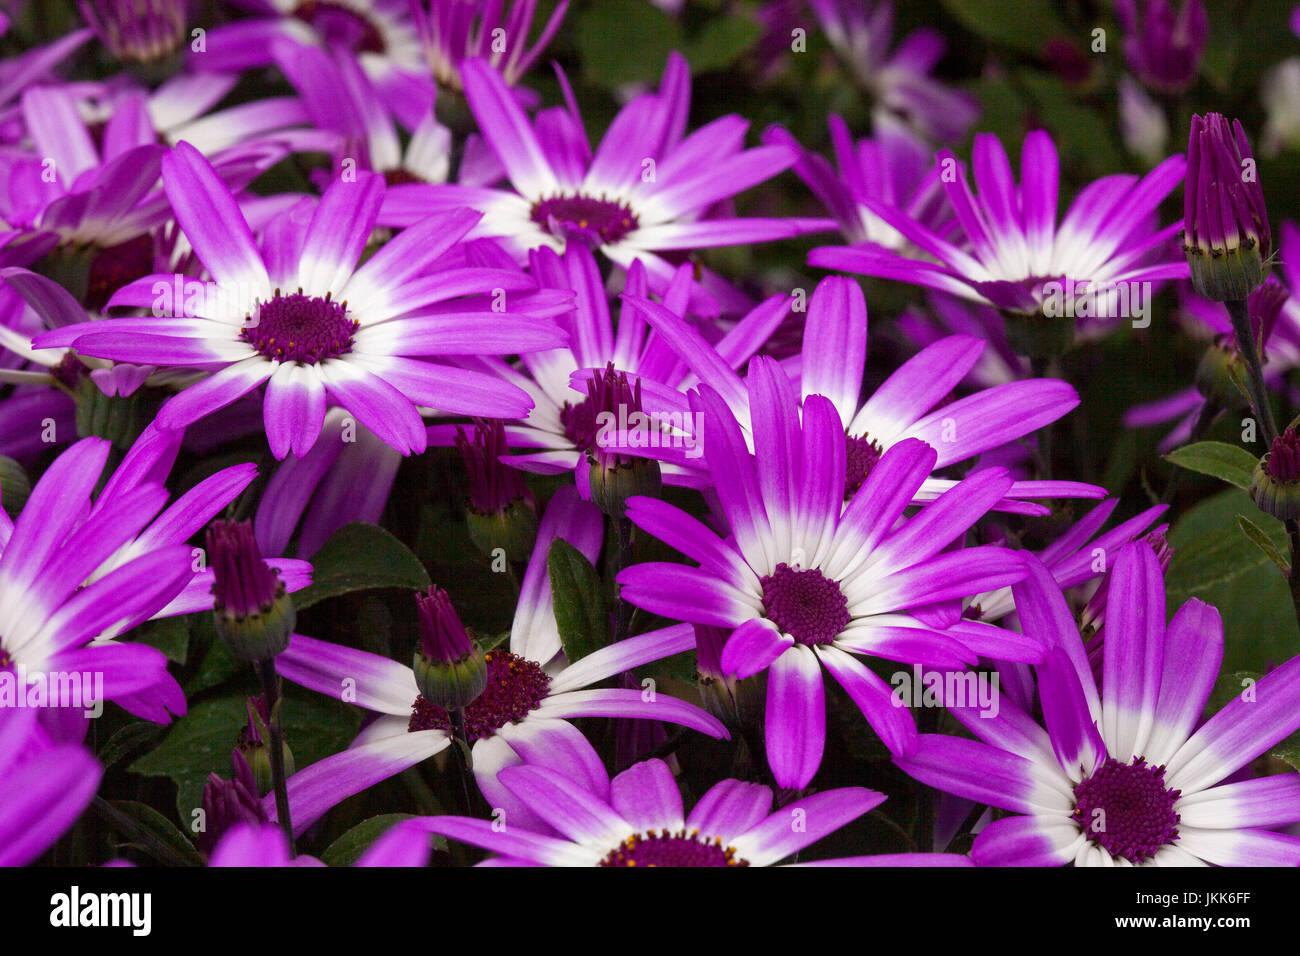 Cluster of vivid purple / magenta and white flowers of cineraria Stock Photo